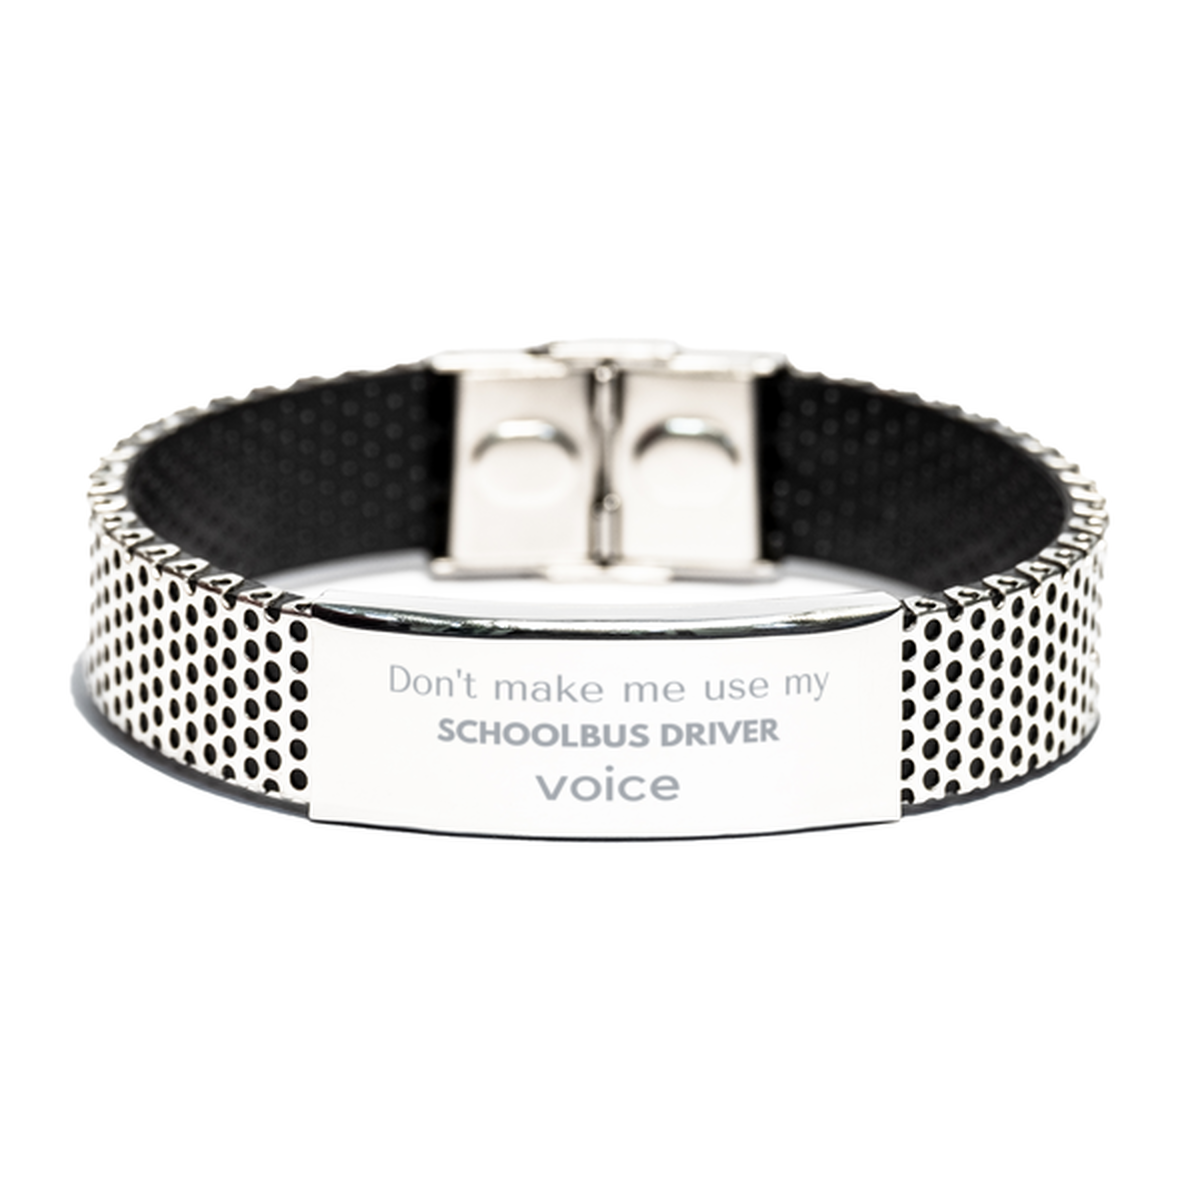 Don't make me use my Schoolbus Driver voice, Sarcasm Schoolbus Driver Gifts, Christmas Schoolbus Driver Stainless Steel Bracelet Birthday Unique Gifts For Schoolbus Driver Coworkers, Men, Women, Colleague, Friends